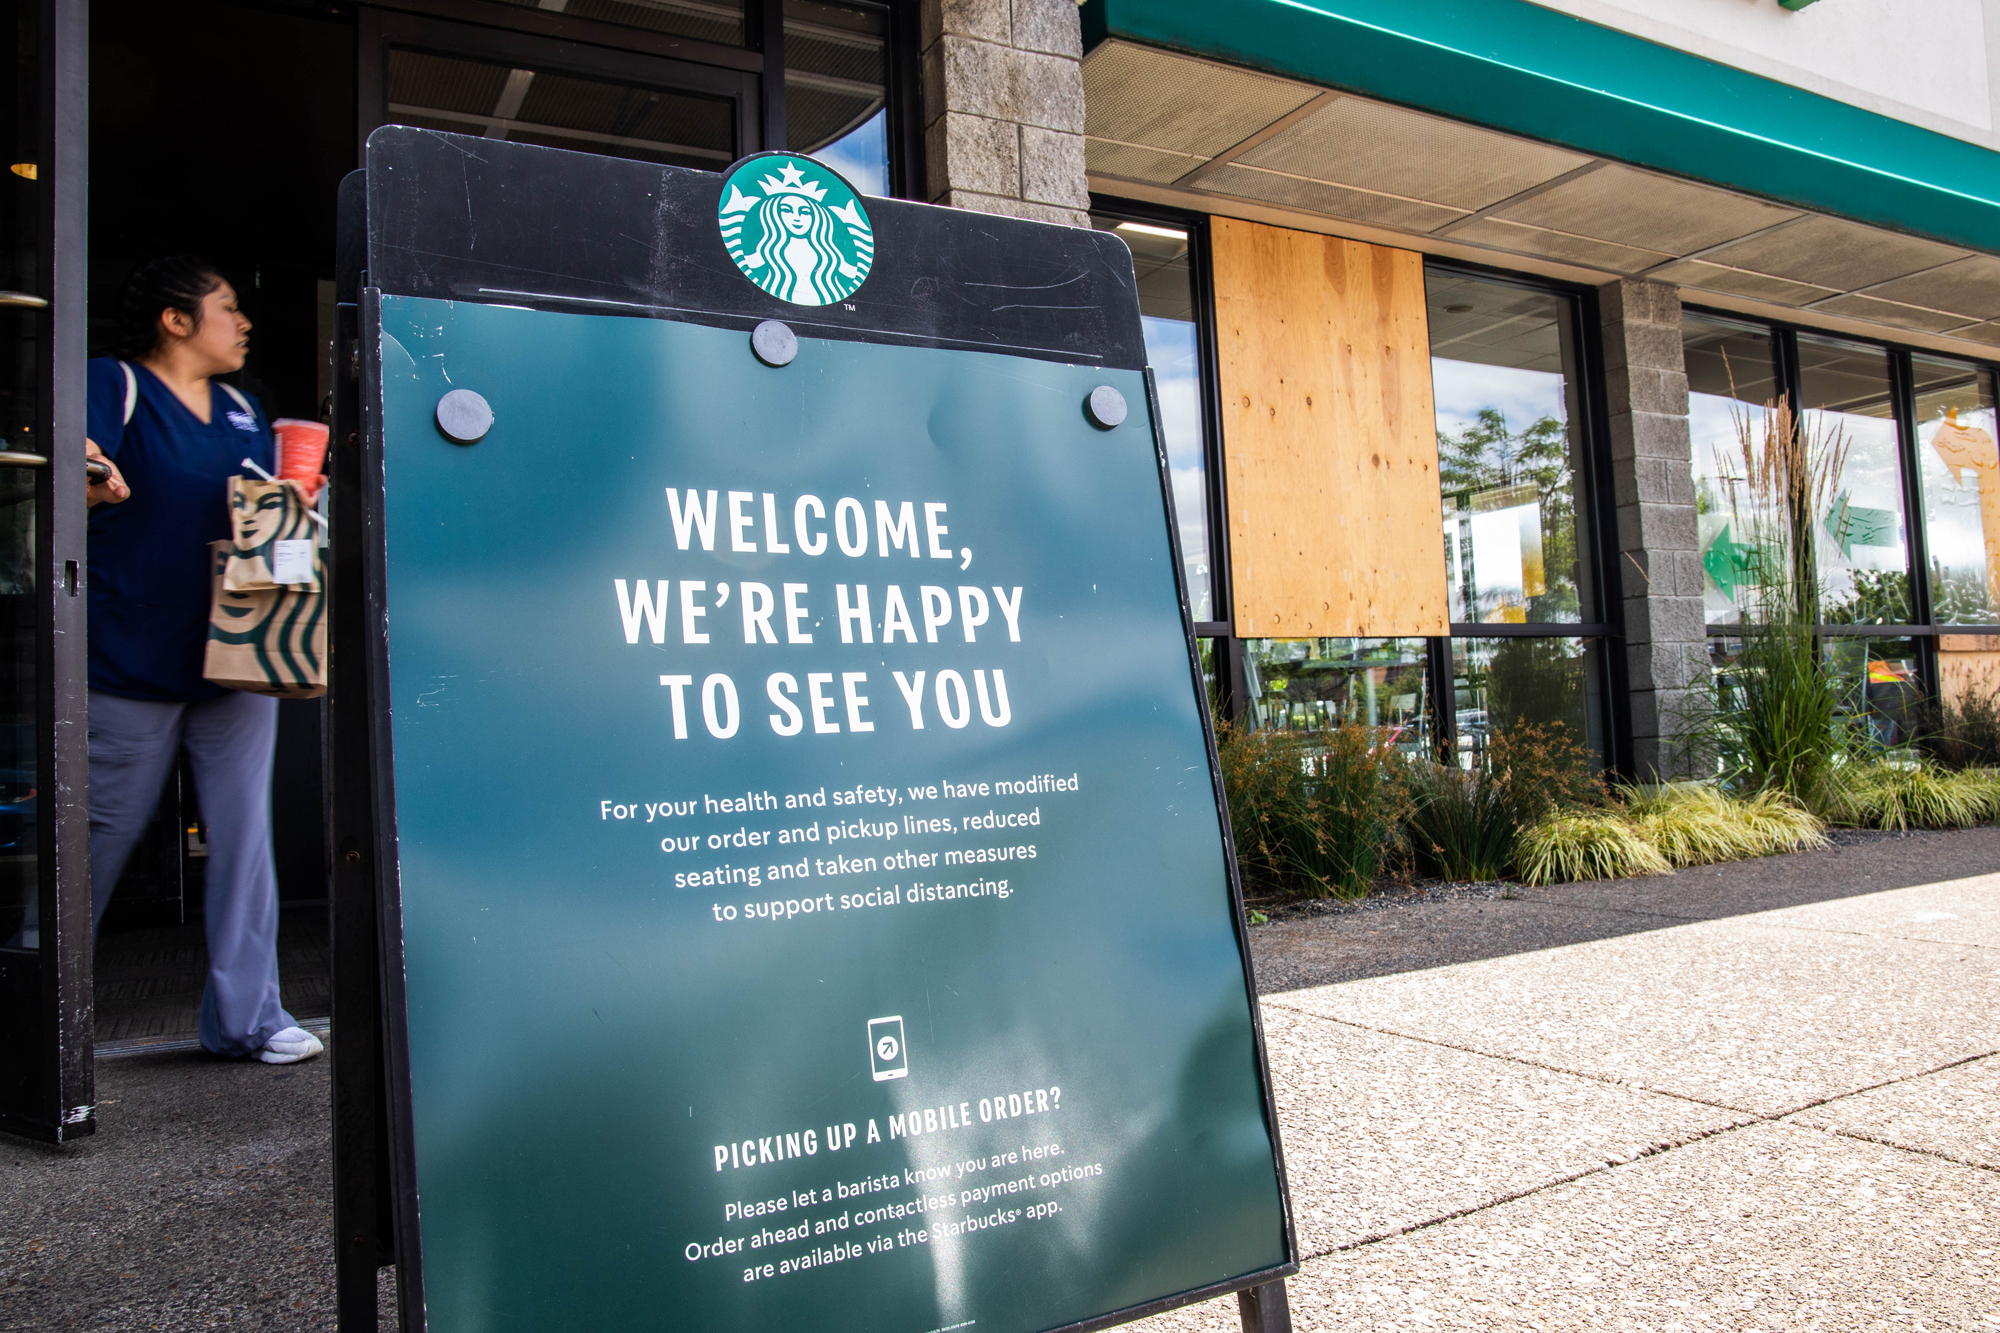 Iconic Starbucks store in downtown Vancouver to close - Business